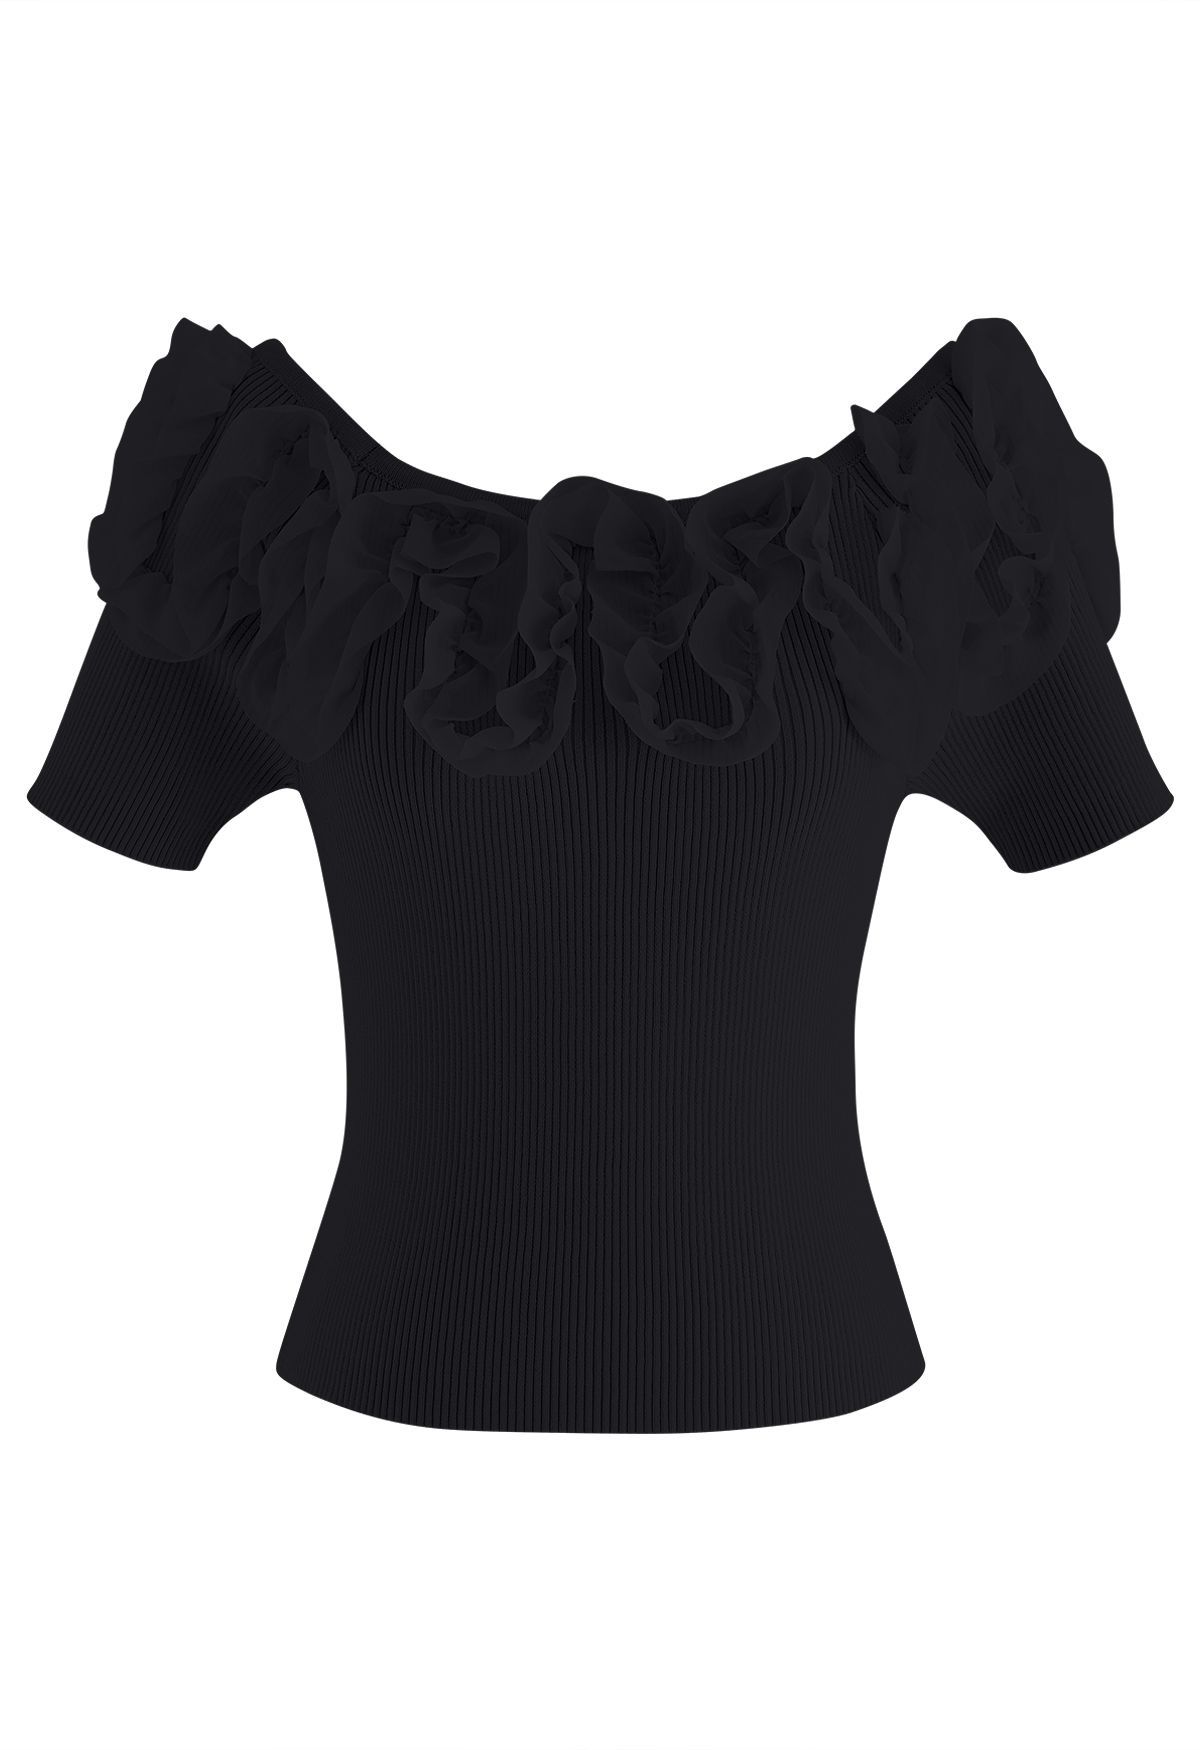 Ruffle Mesh Boat Neck Knit Top in Black | Chicwish